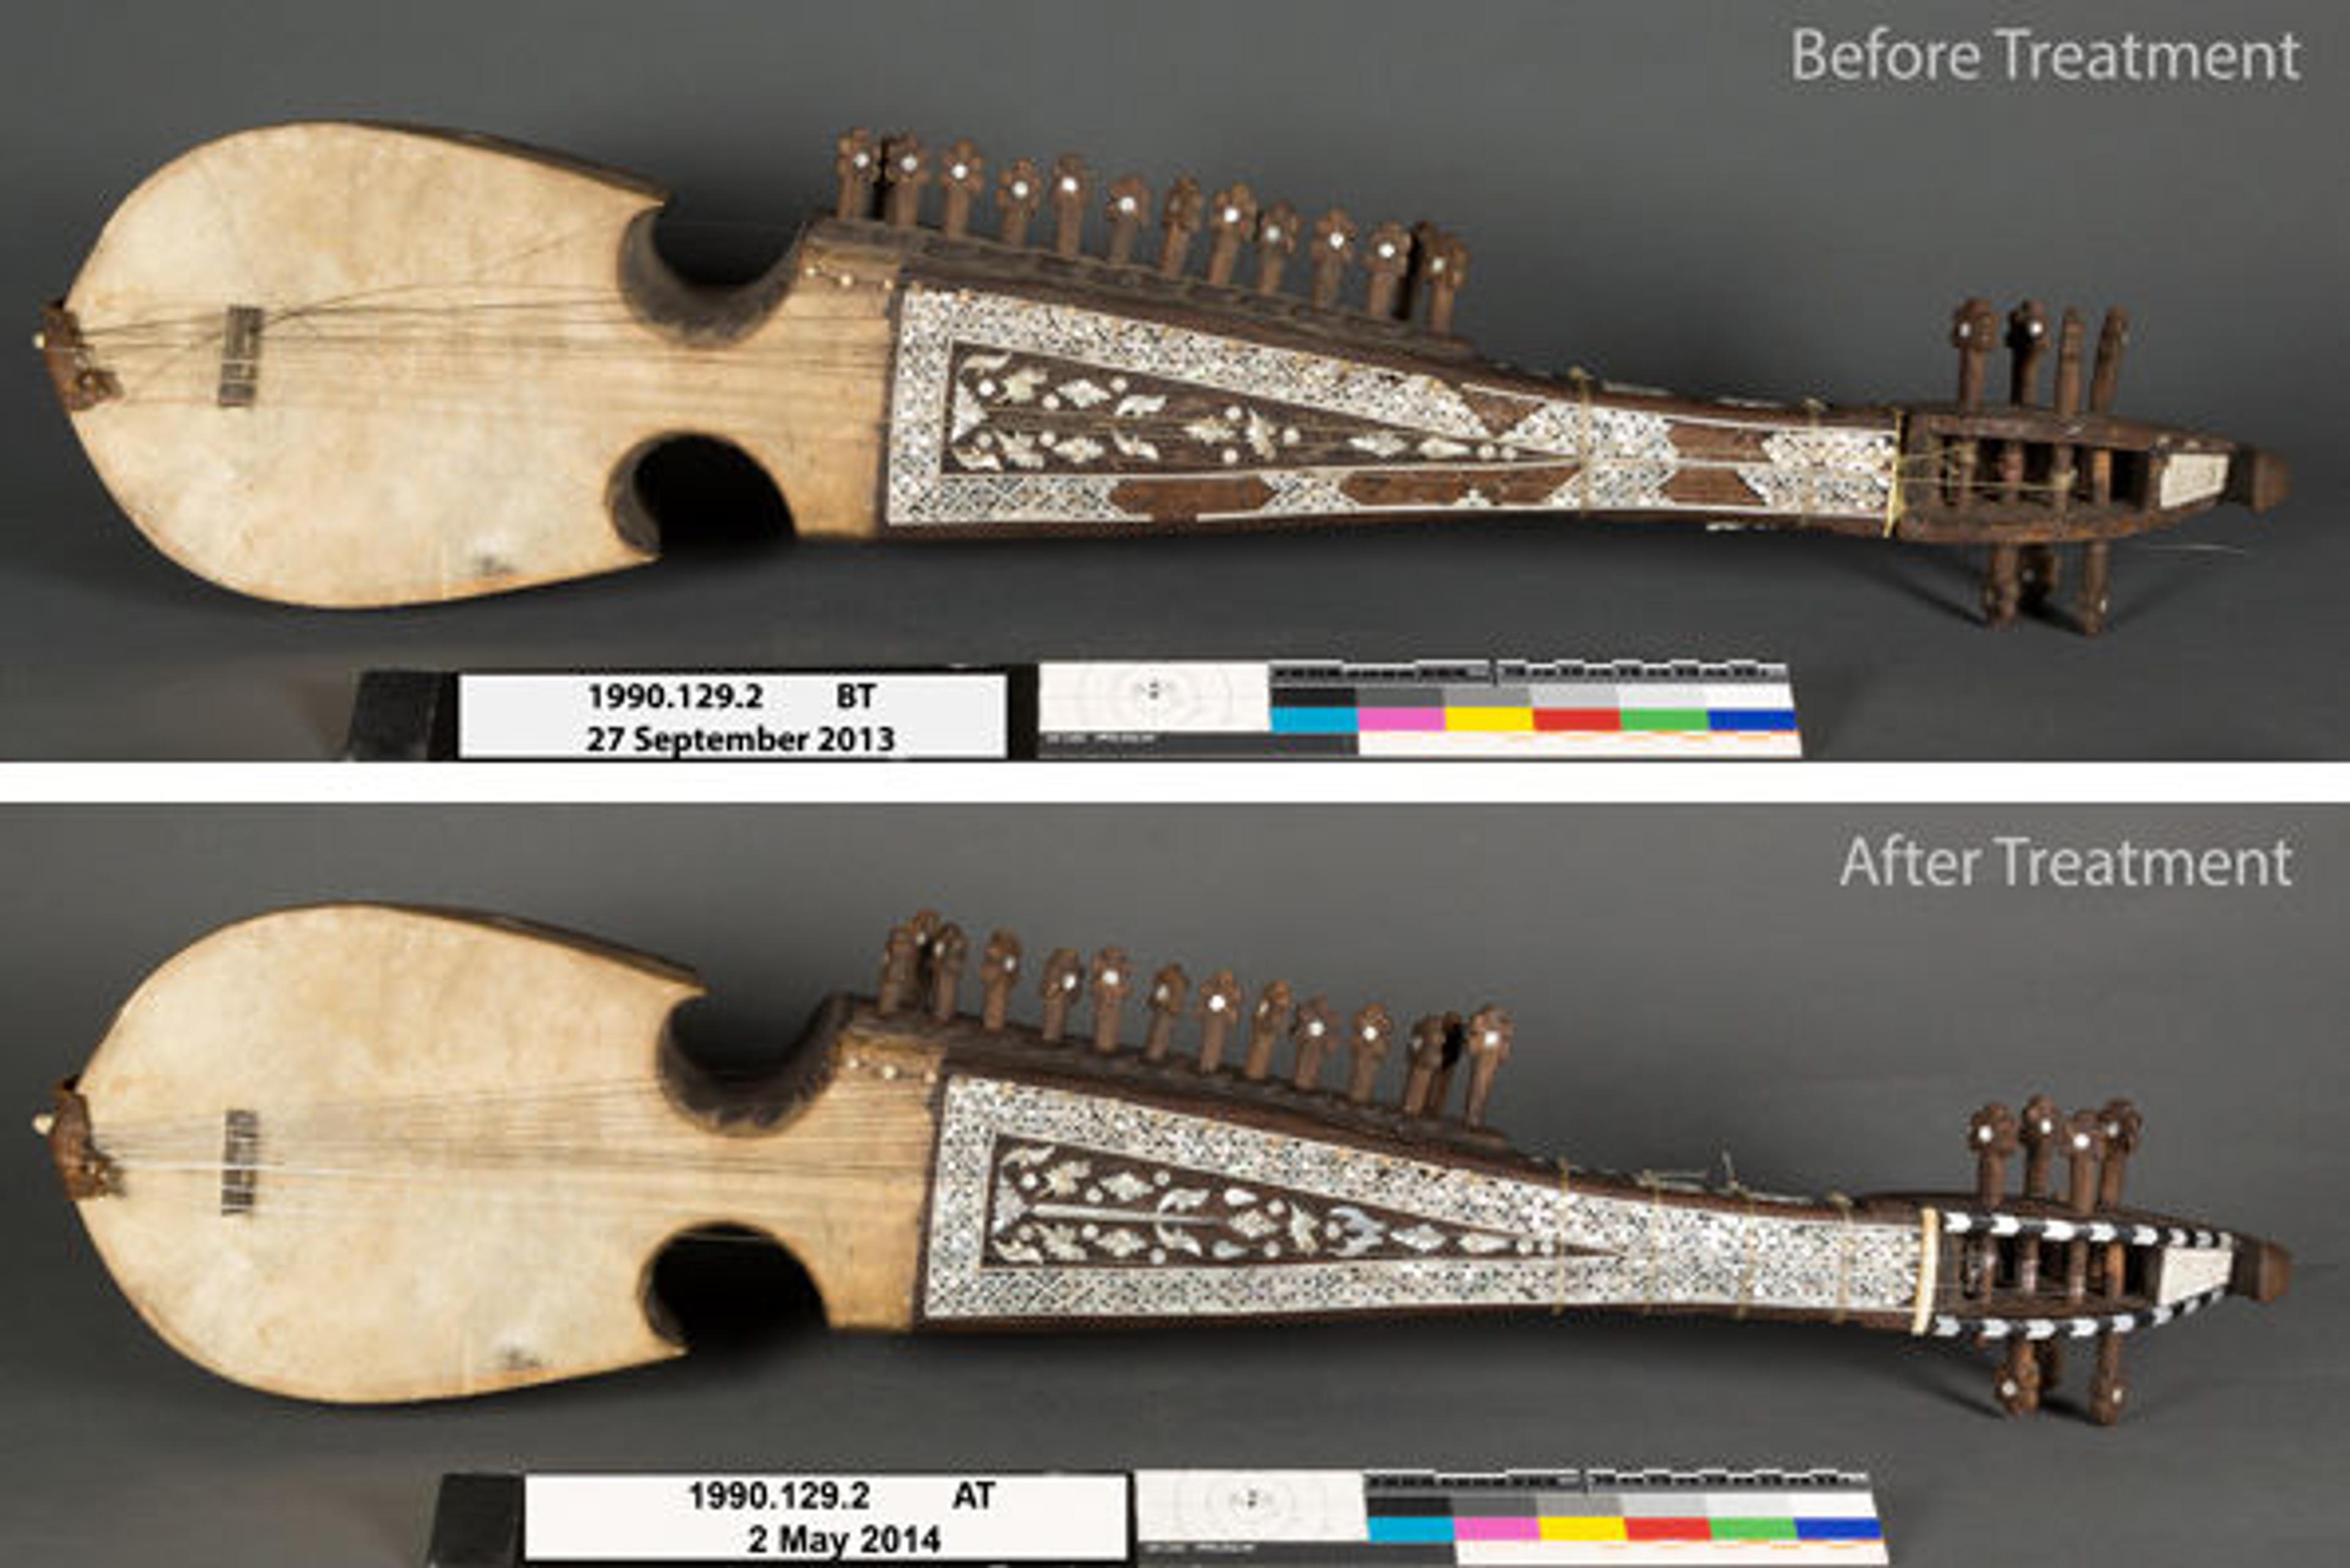 Rubāb. Afghanistan, early 20th century; before and after conservation treatment